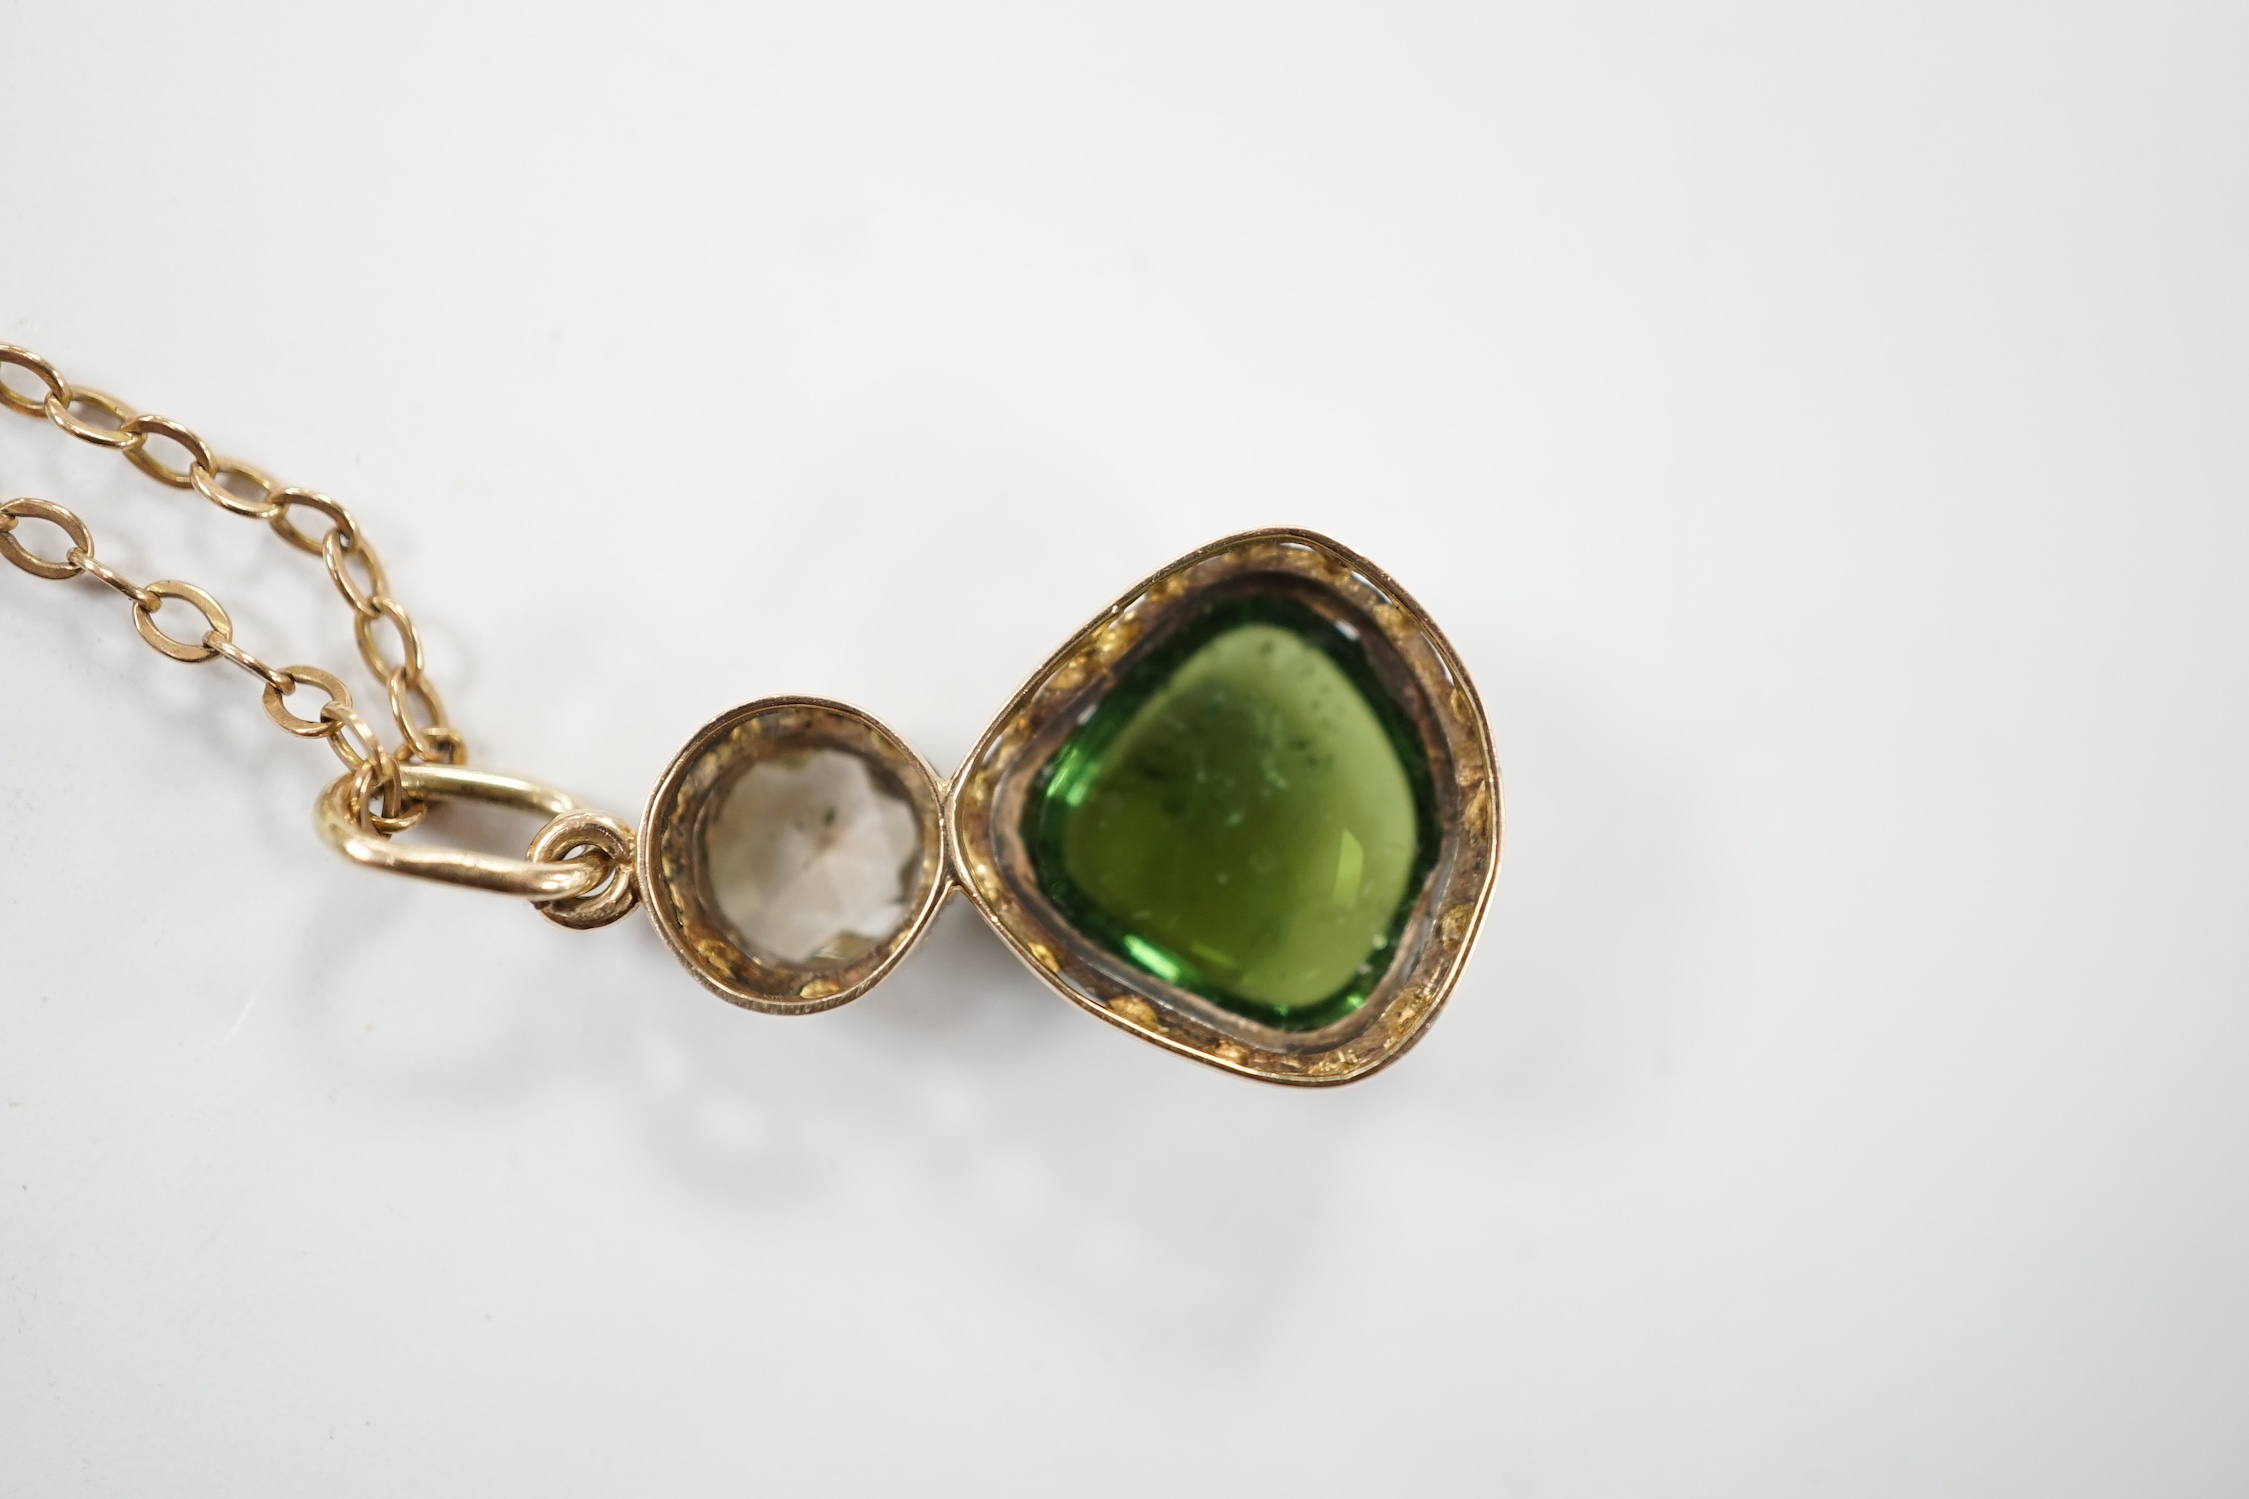 A Georgian yellow and white metal, rose cut diamond and shaped cabochon green tourmaline set pendant, 24mm, on a yellow metal chain, 48cm, gross weight 5.8 grams. Fair condition.